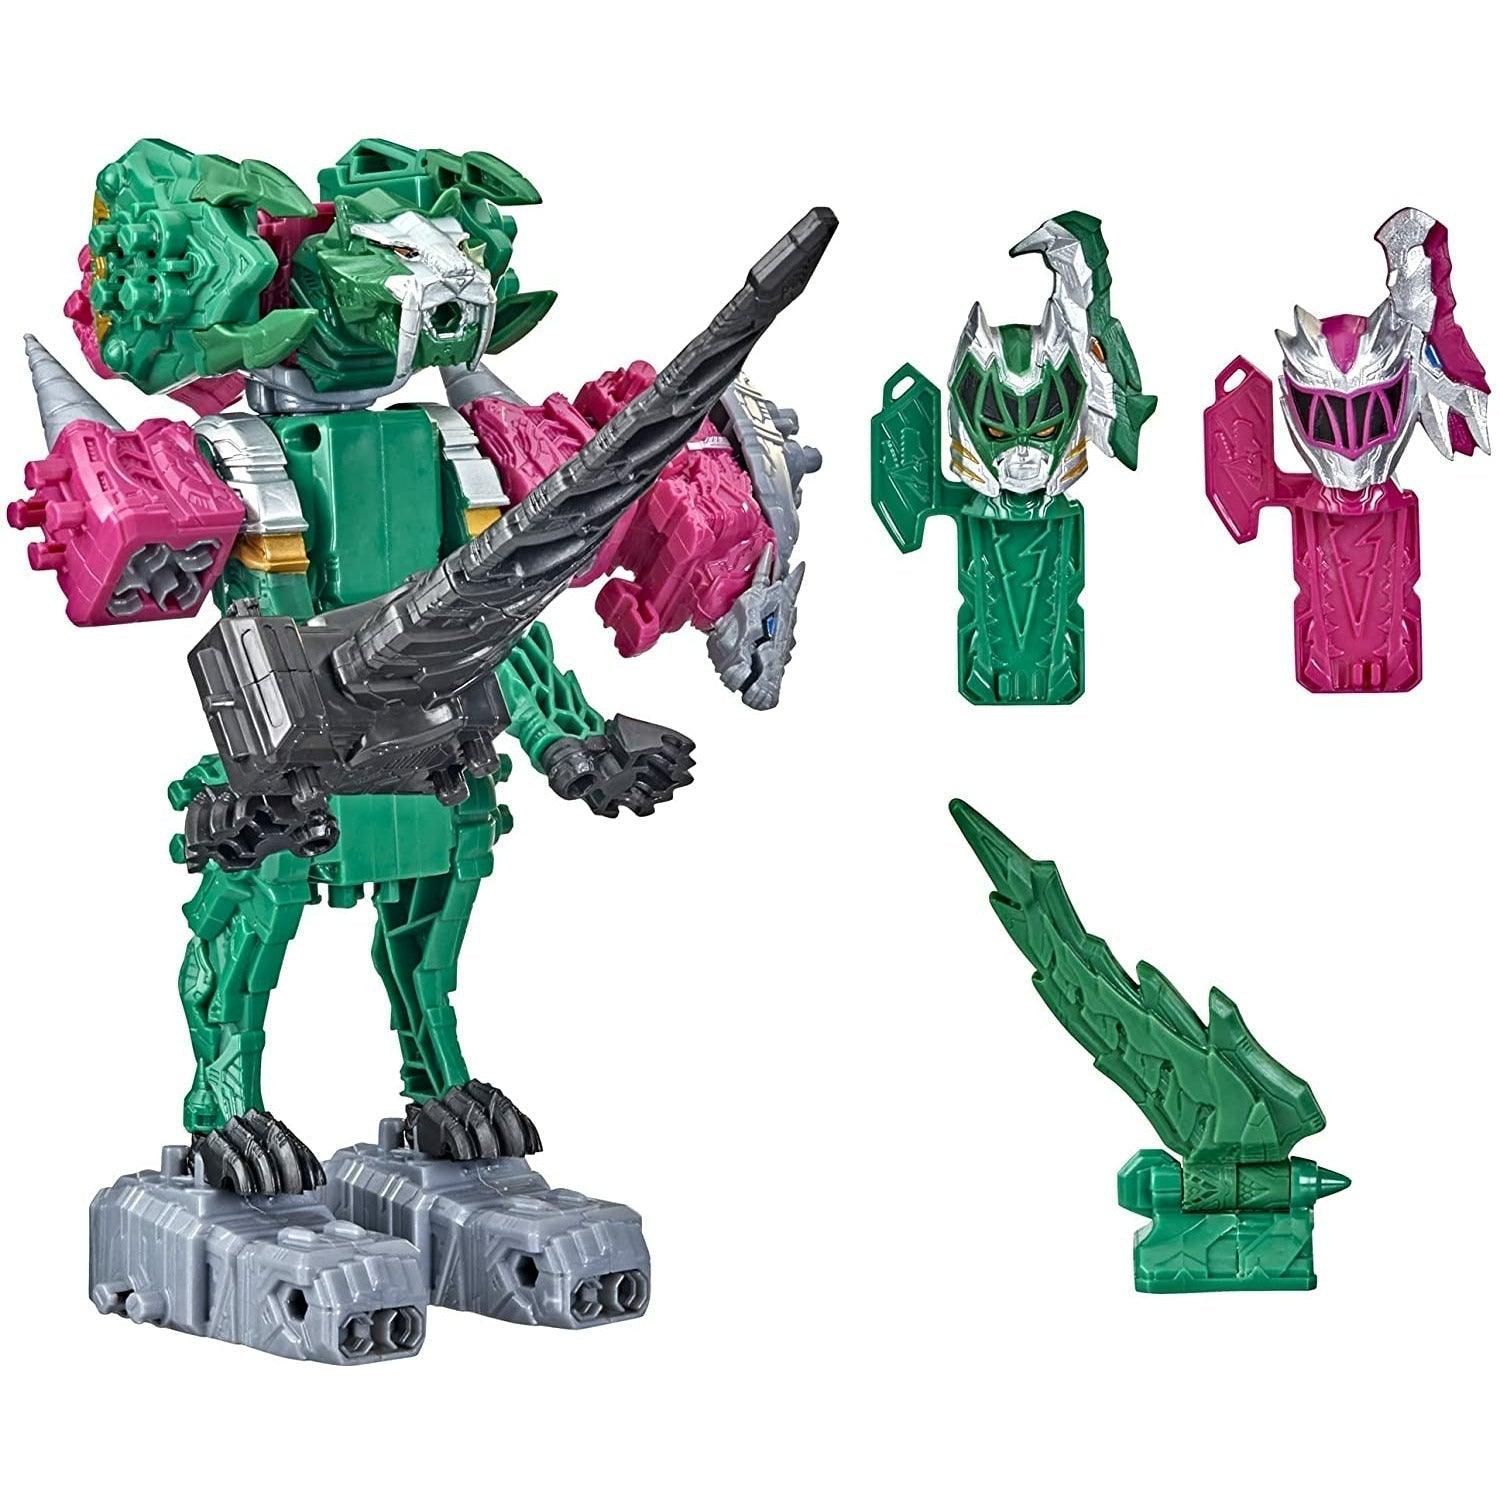 Power Rangers Dino Fury Pink Ankylo Hammer and Green Tiger Claw Zord Toys for Kids Ages 4 and Up Zord Link Mix-and-Match Custom Build System - BumbleToys - 5-7 Years, Boys, Figures, Hasbro, Power Rangers, Pre-Order